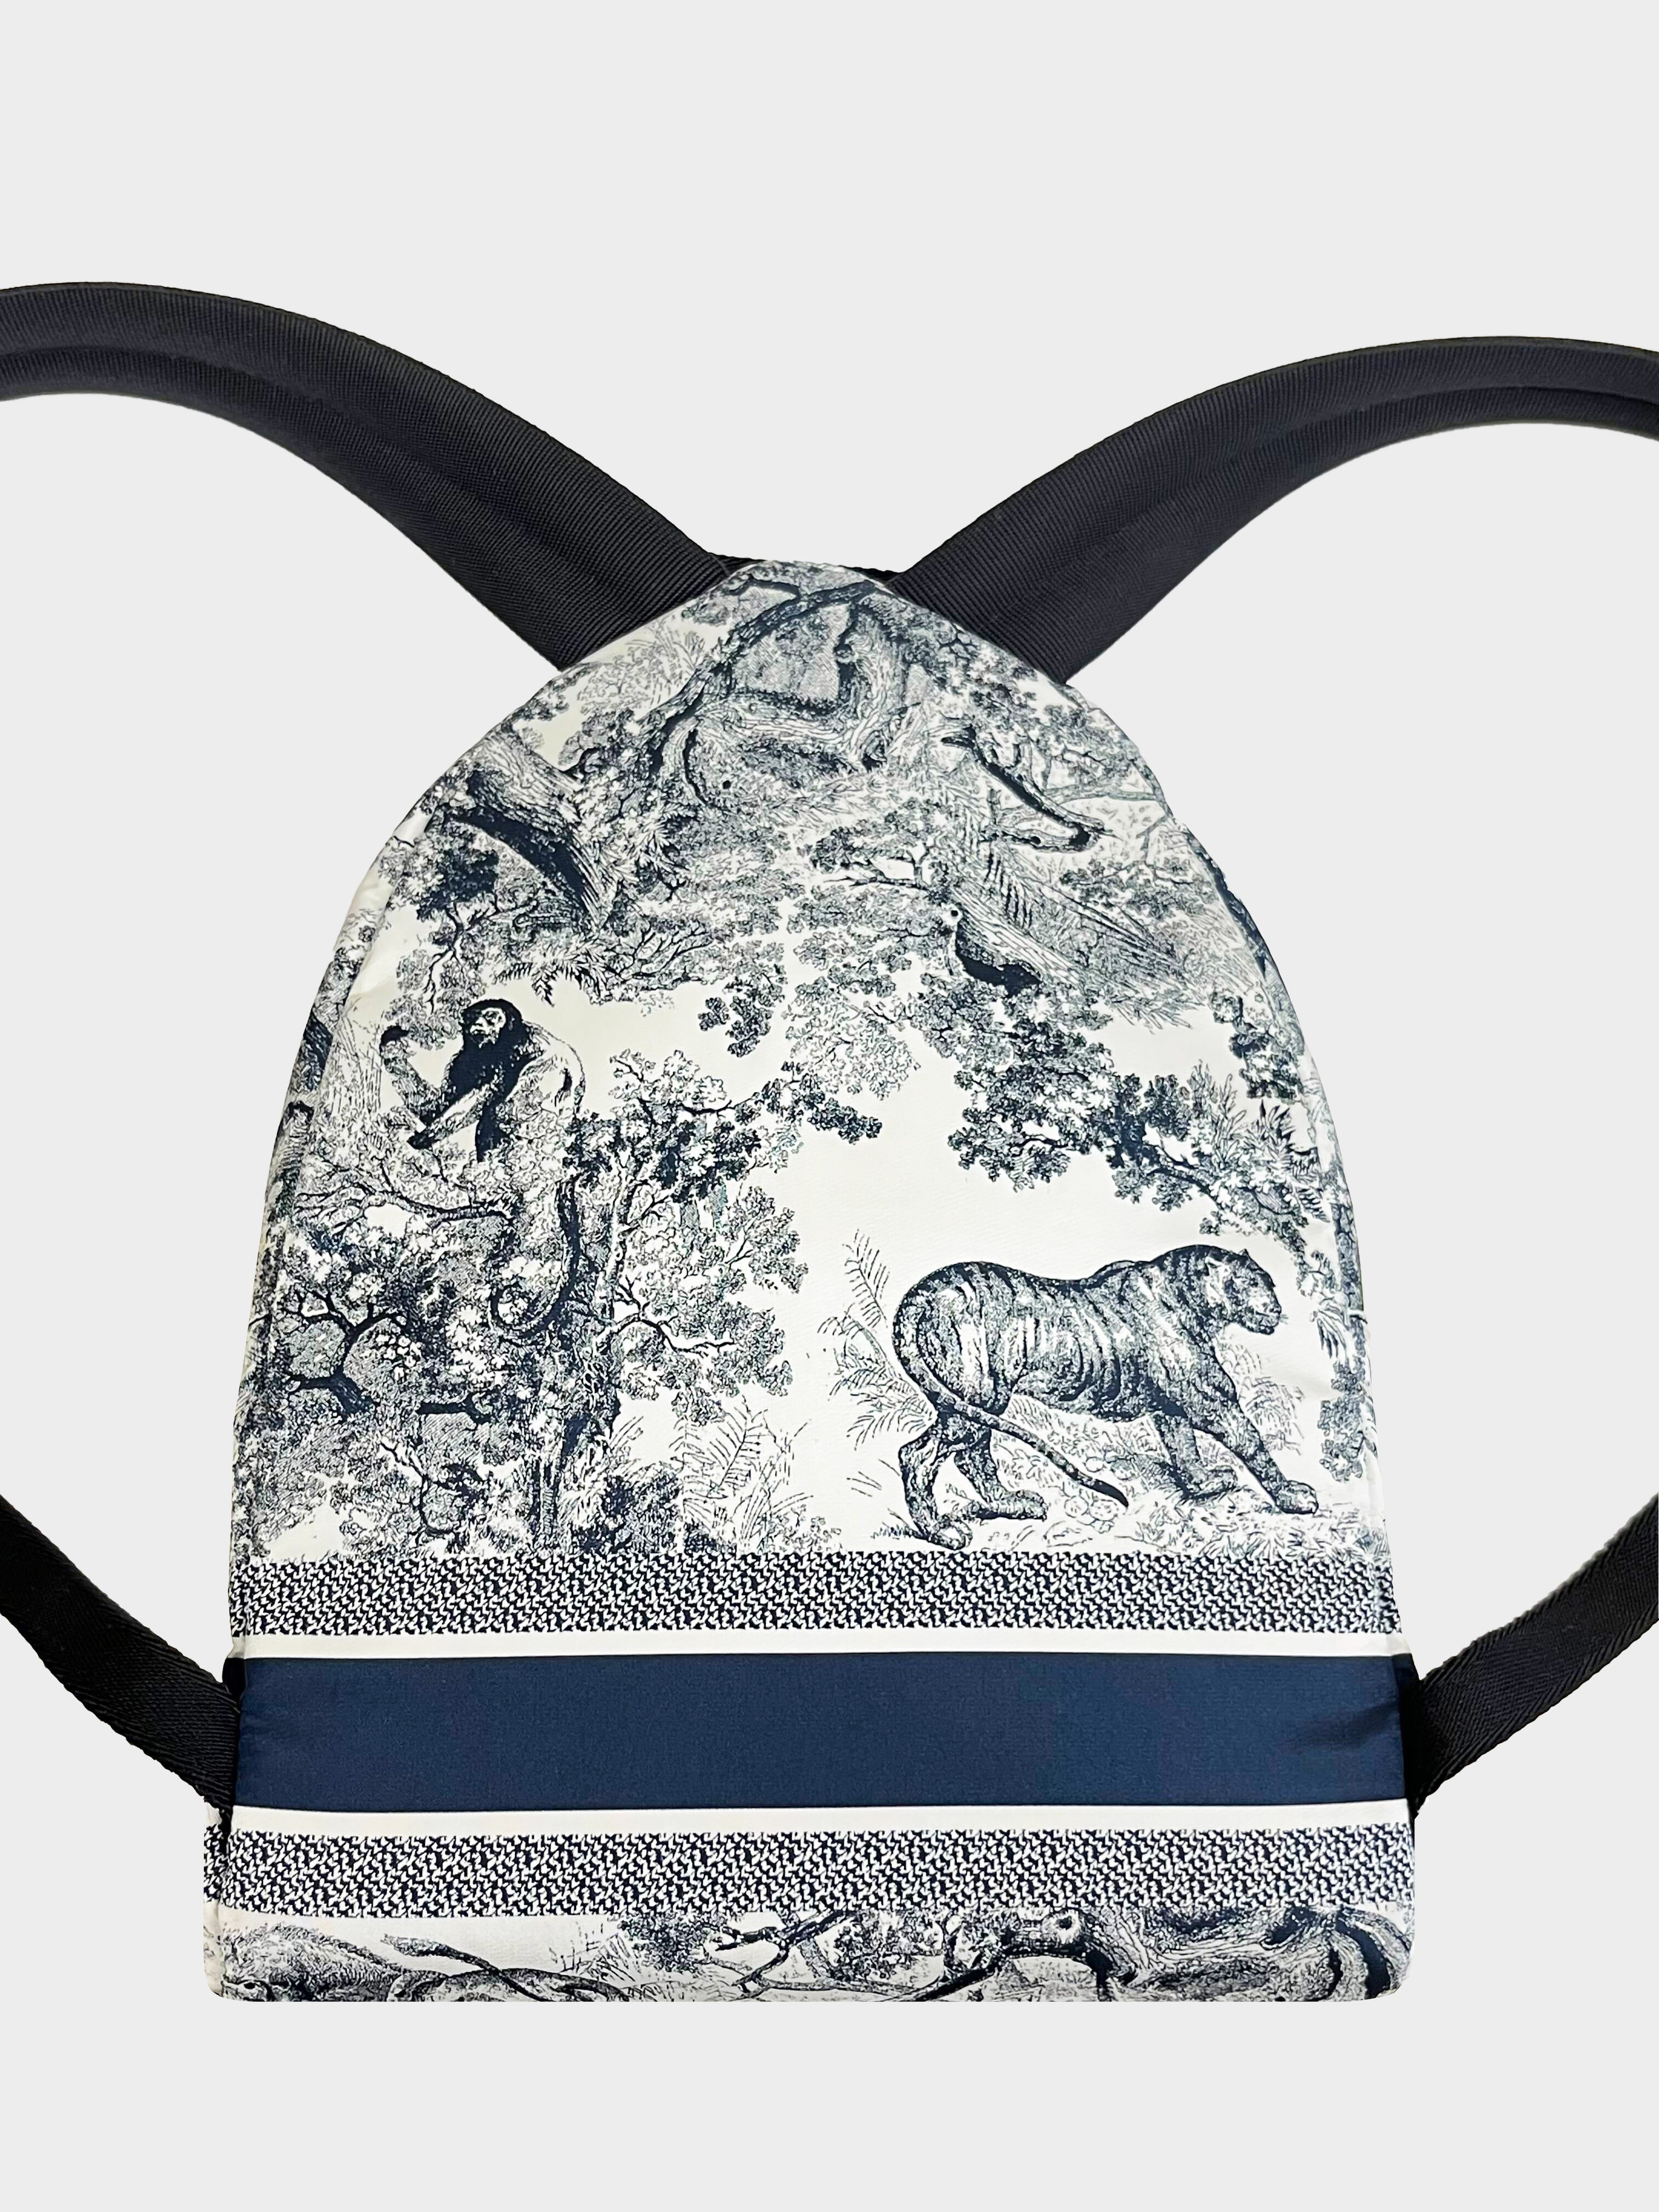 Christian Dior 2021 Toile De Jouy Small Backpack